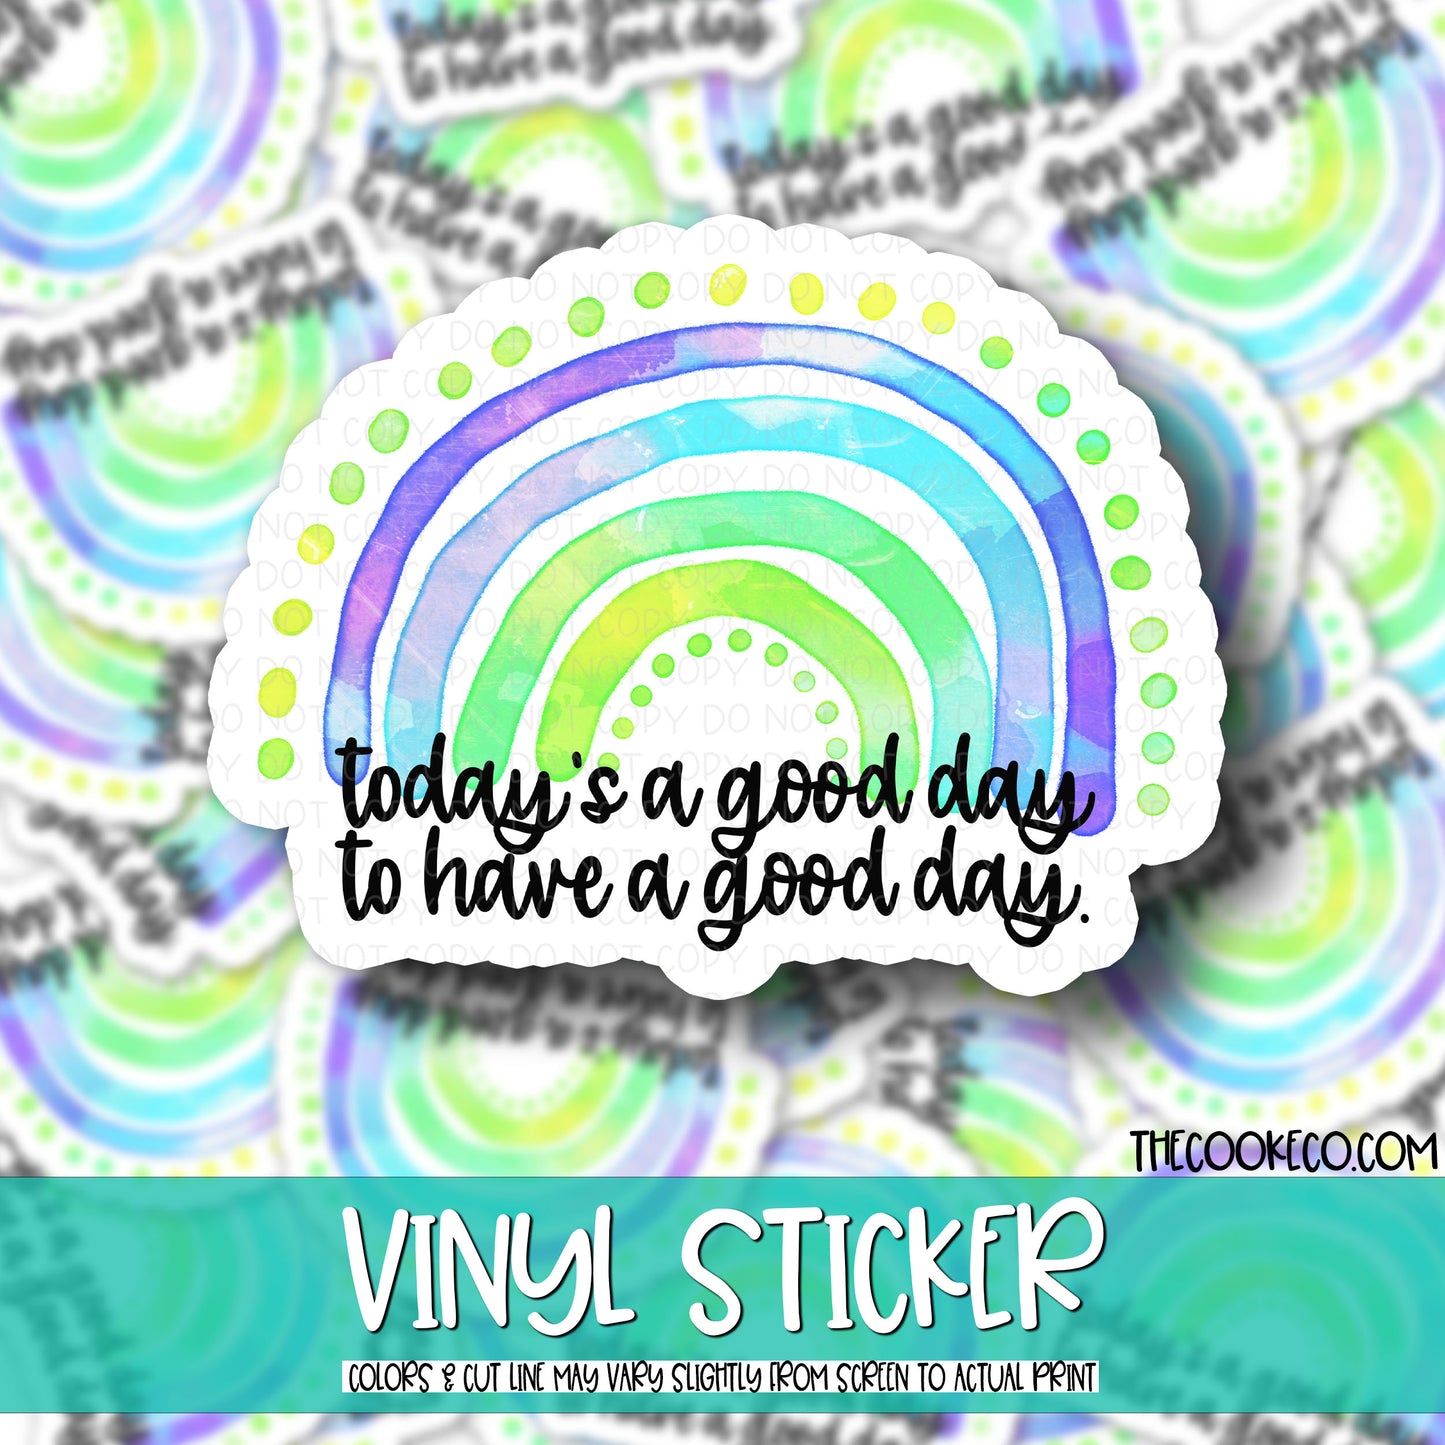 Vinyl Sticker | #V0058 - TODAY'S A GOOD DAY TO HAVE A GOOD DAY